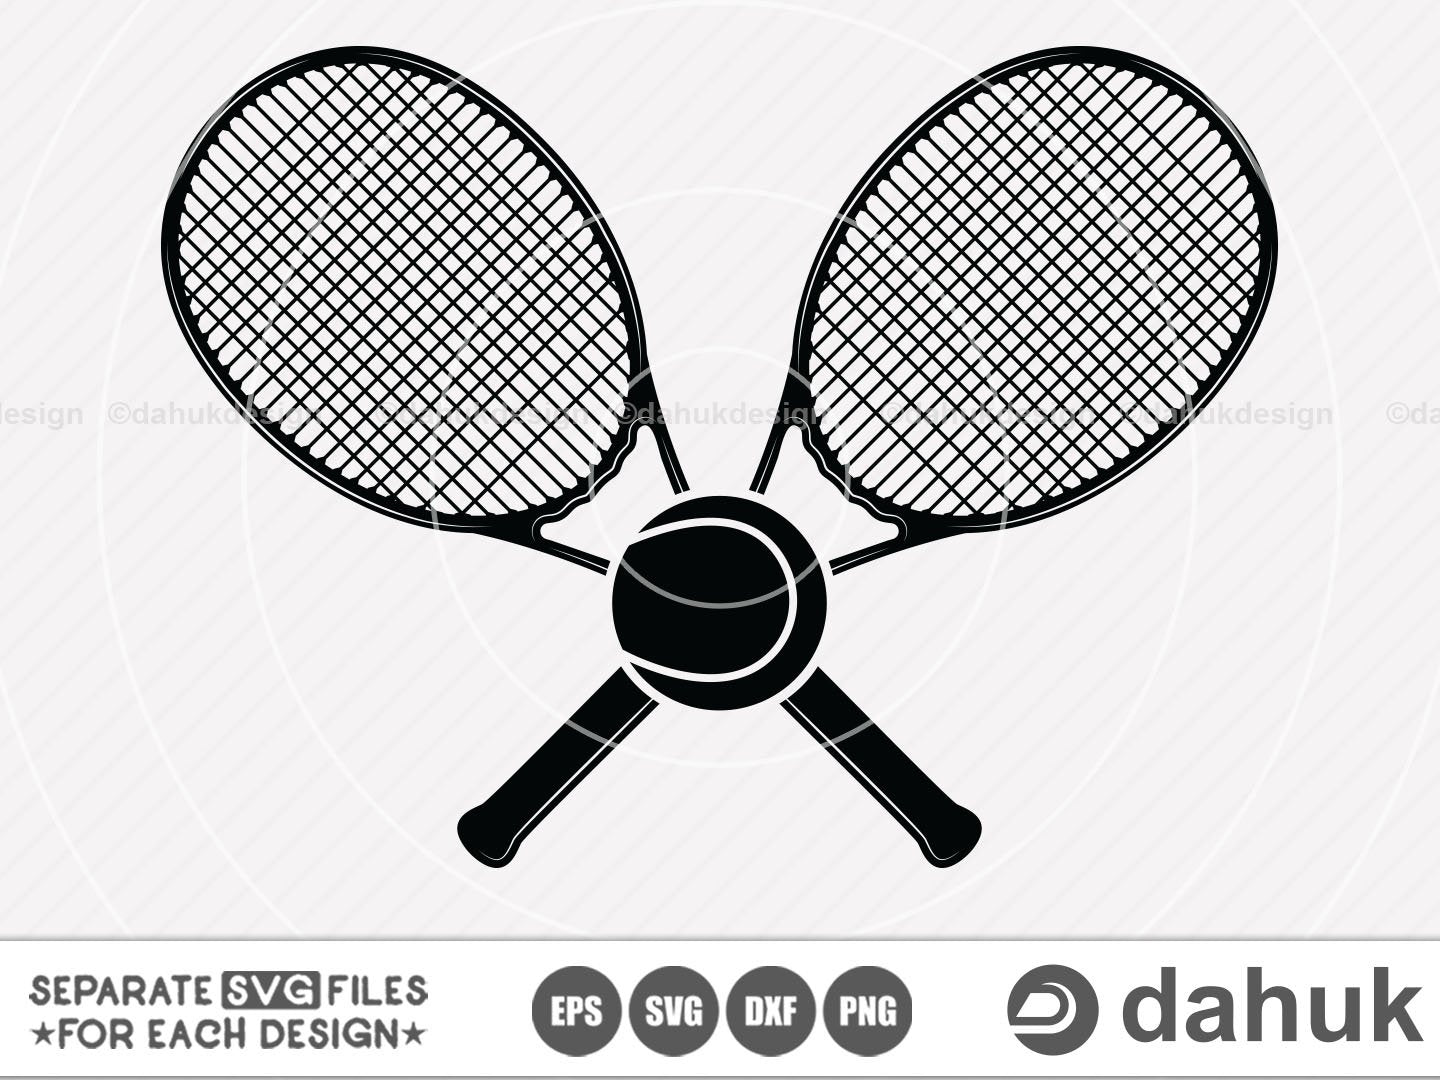 tennis silhouette png